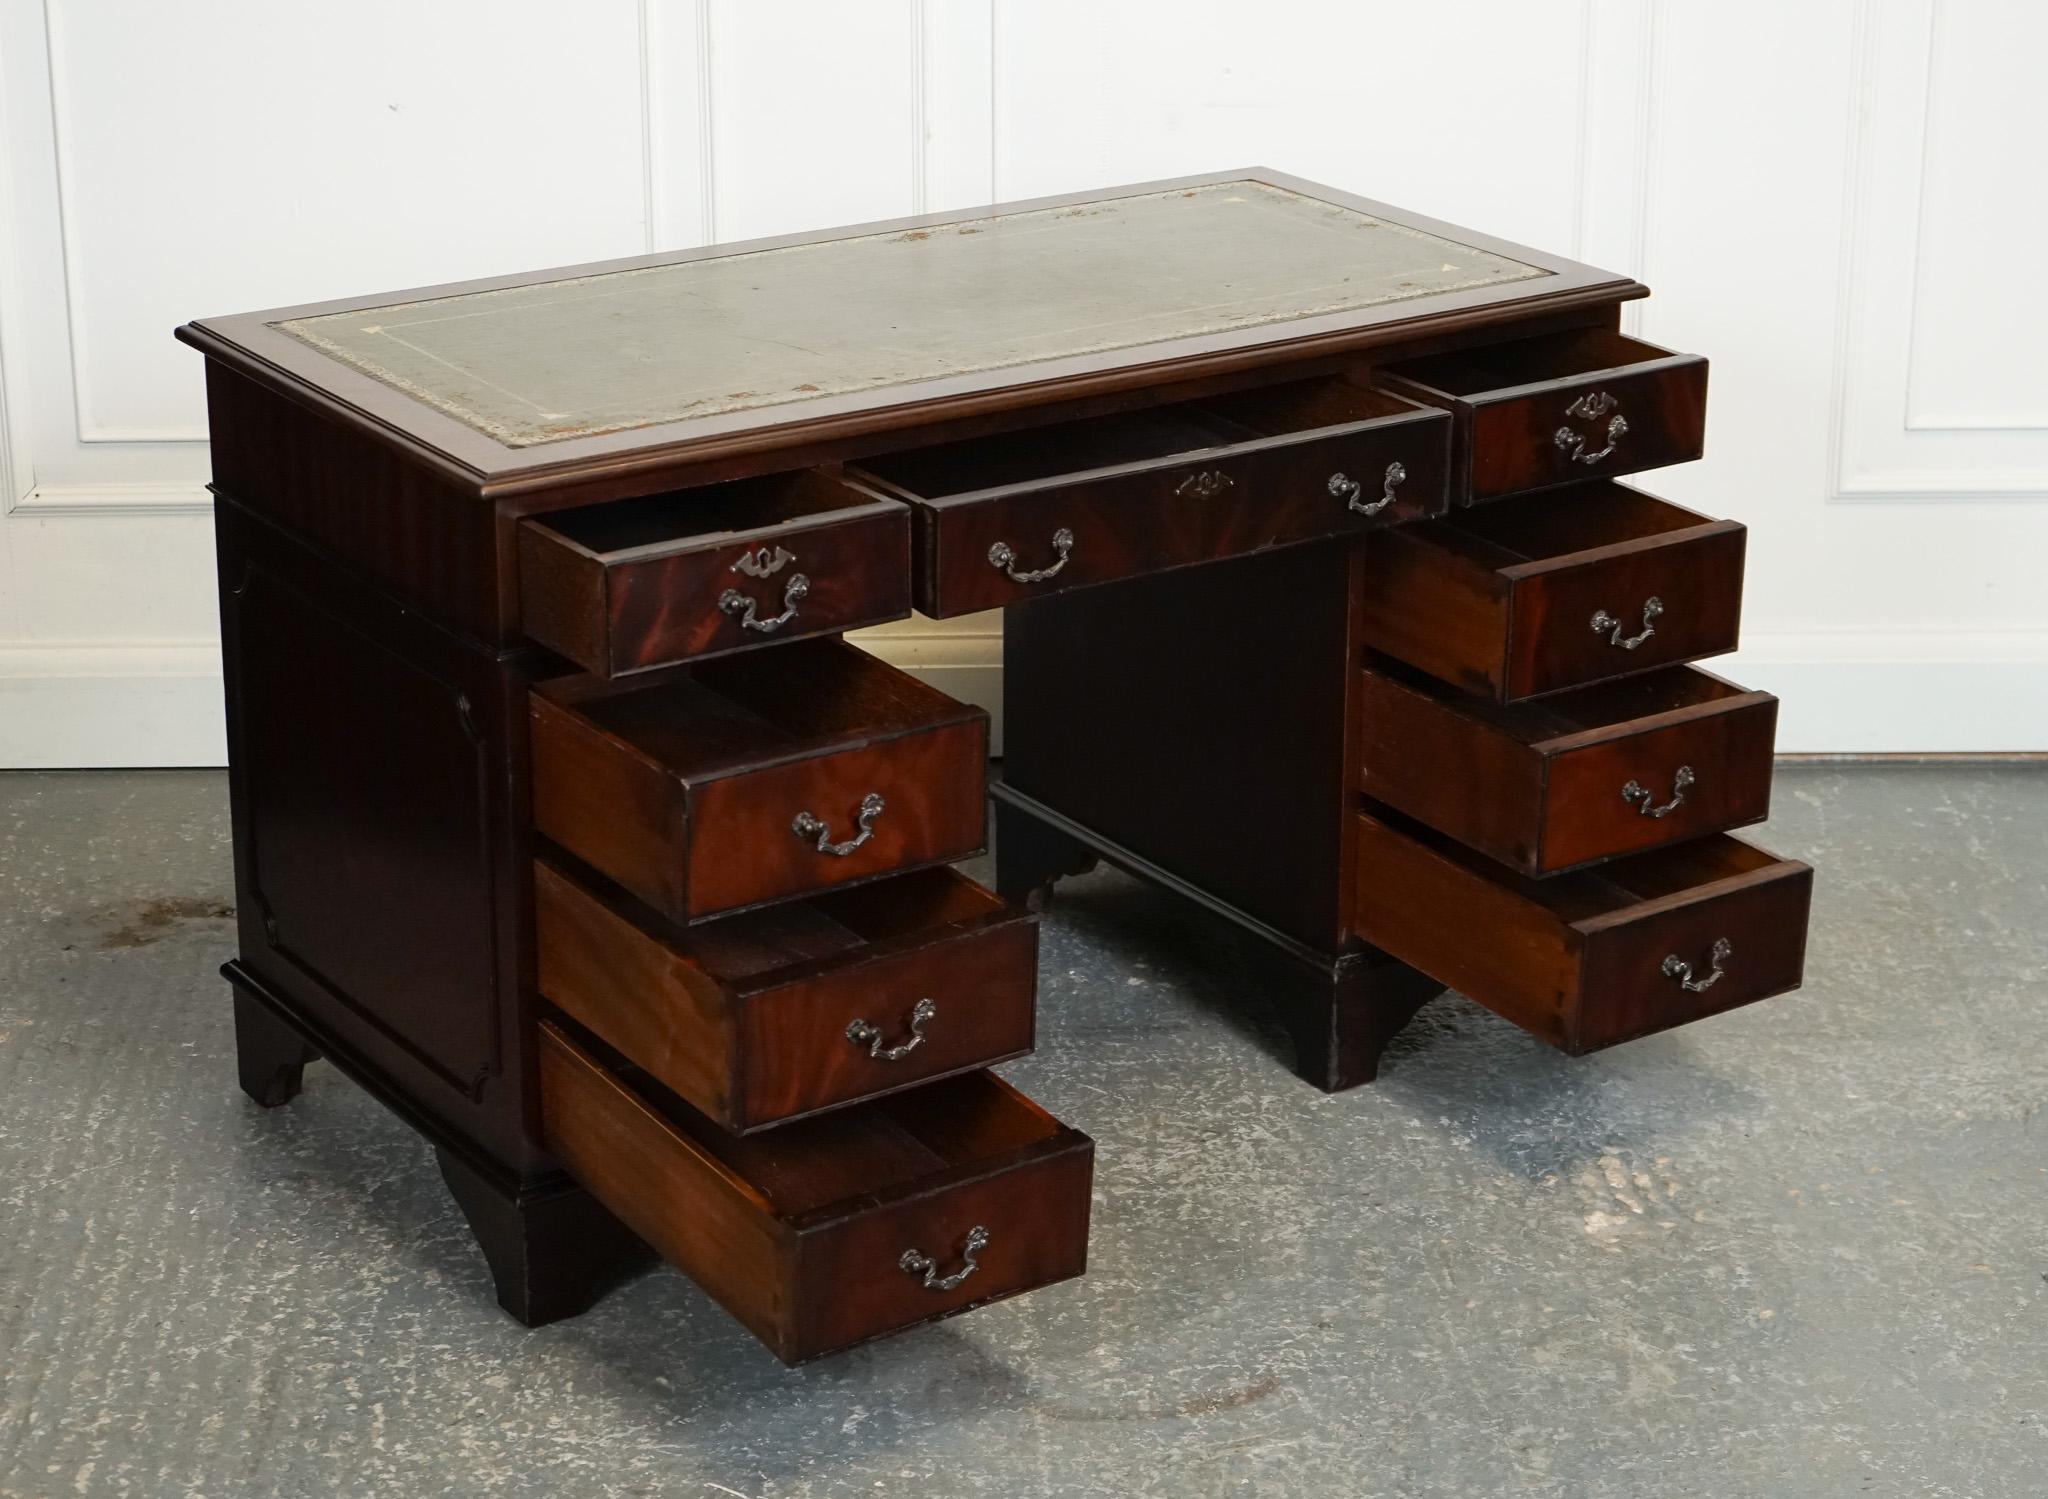 Antiques of London



We are delighted to offer for sale this Gorgeous Vintage Hunter Green Leather Top Pedestal Desk.

Are you searching for the perfect desk that combines vintage elegance with practicality? Look no further than this gorgeous